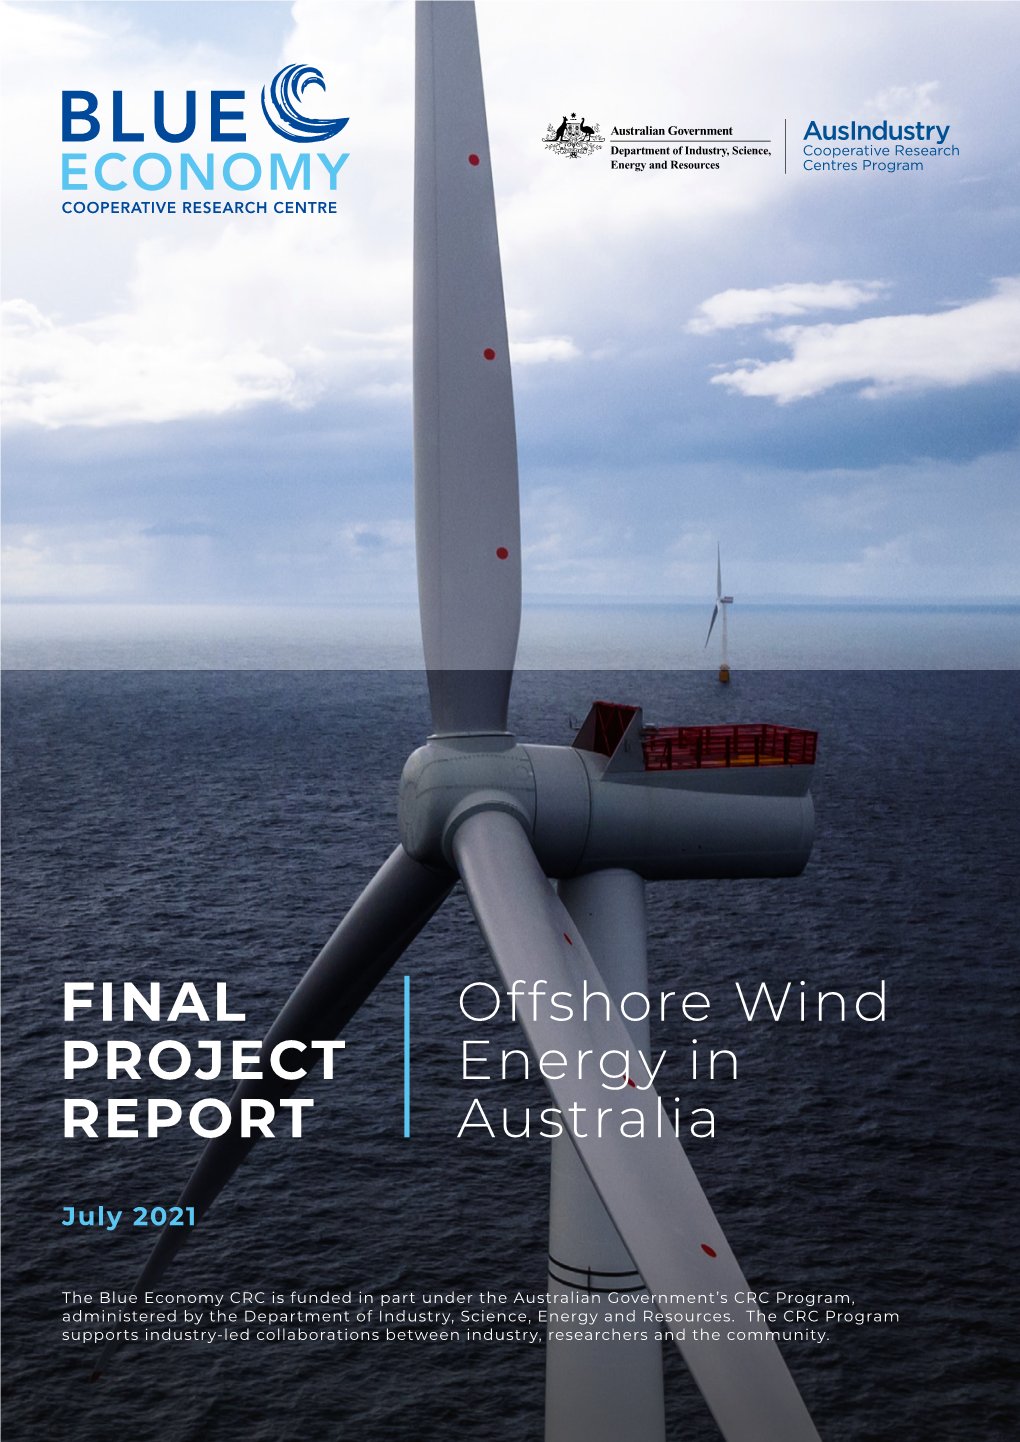 FINAL PROJECT REPORT Offshore Wind Energy in Australia